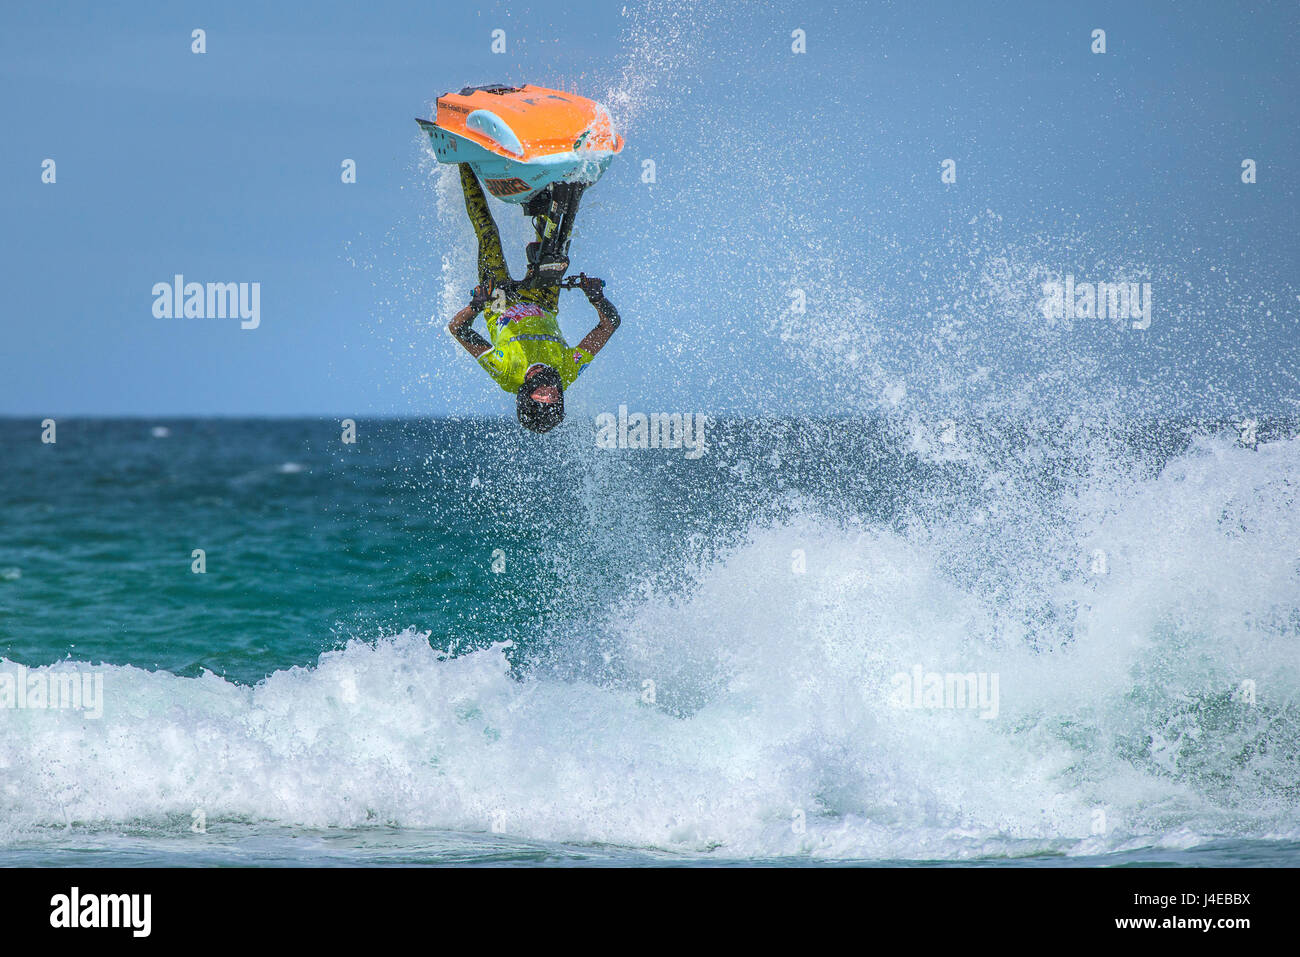 Fistral Beach; Newquay, Cornwall. 13th May, 2017. British jetski star Dan Foy defies gravity as he performs a stunning aerial display during the IFWA UK. European and IFWA World Championships taking place at Fistral Beach in Newquay, Cornwall.  Photographer: Gordon Scammell/Alamy Live News. Stock Photo